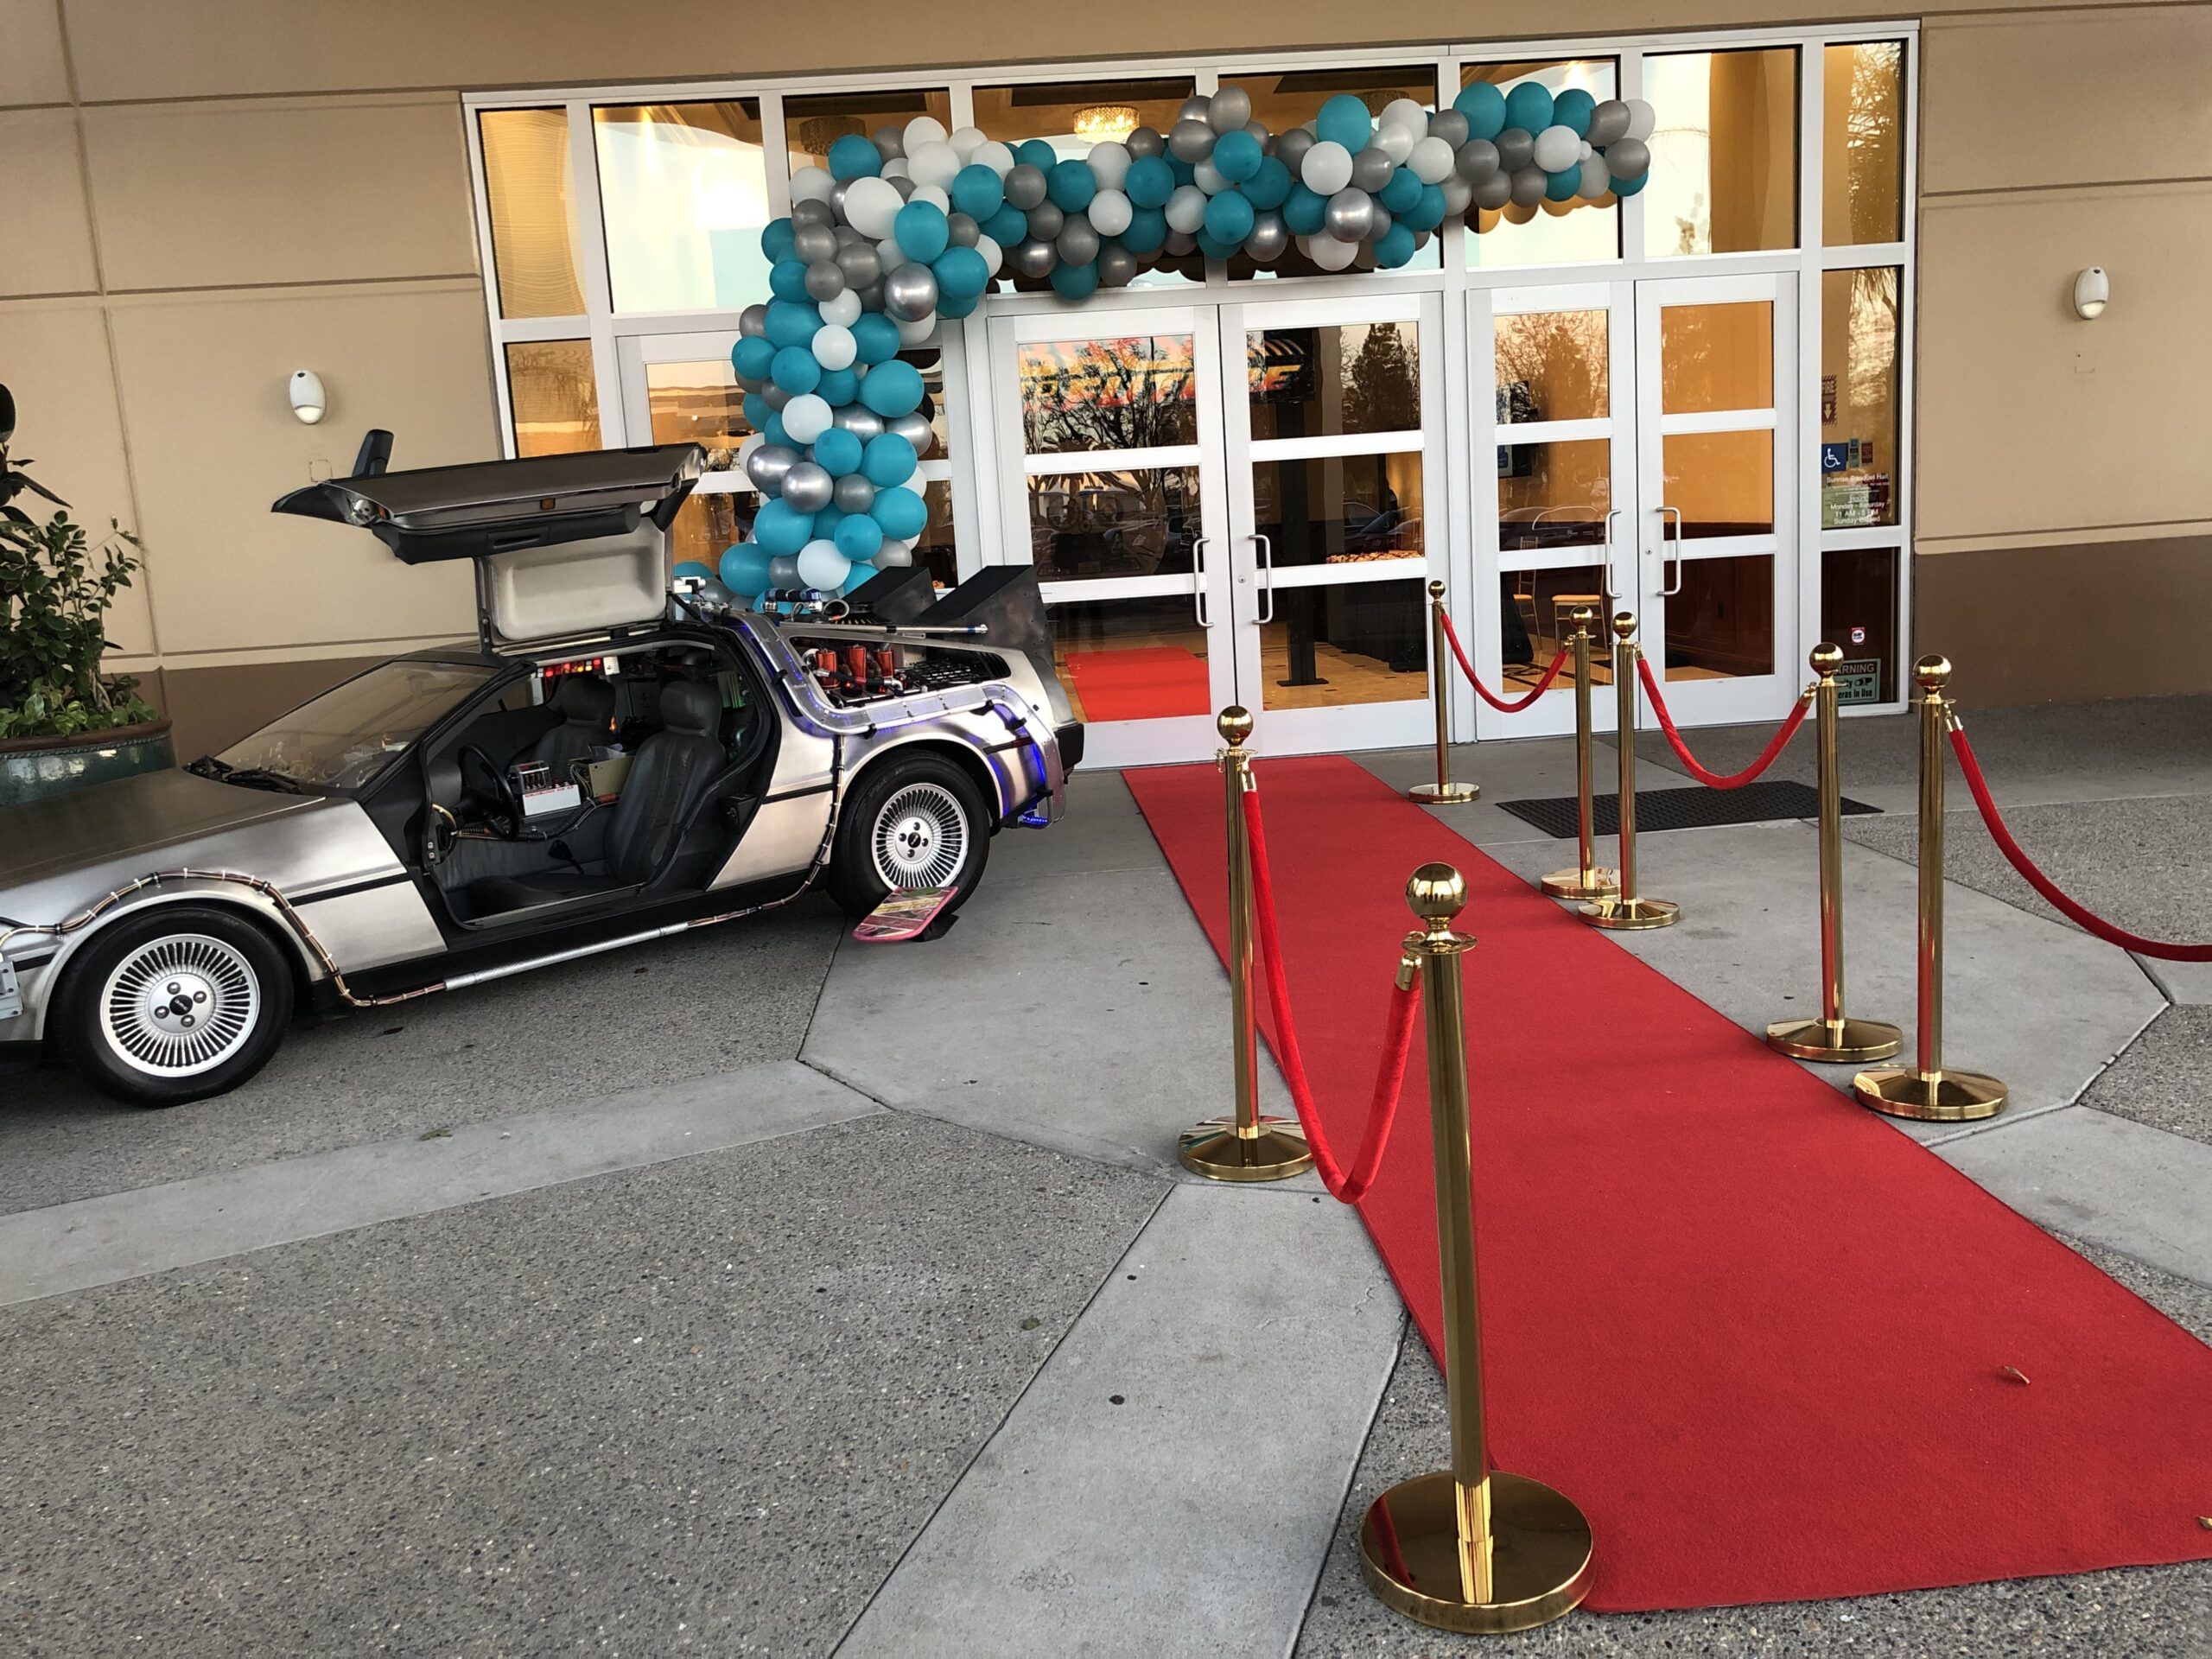 back to the future decorations Bulan 3 HIP Entertainment Works: Back to the Future Corporate Event!